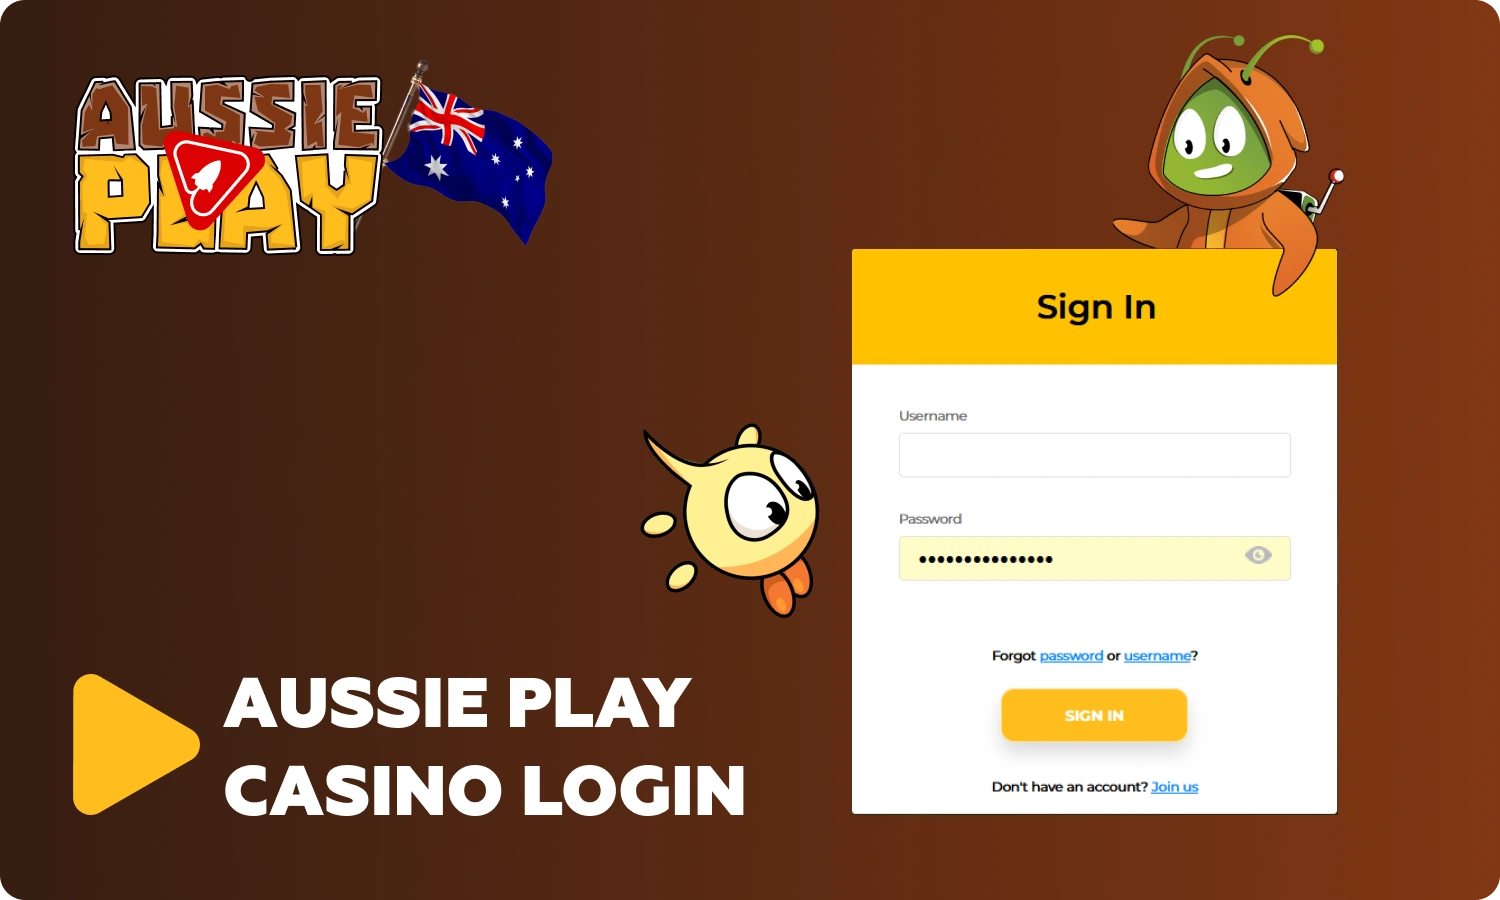 Once registered, players from Australia are ready to access their personal account at Aussie Play